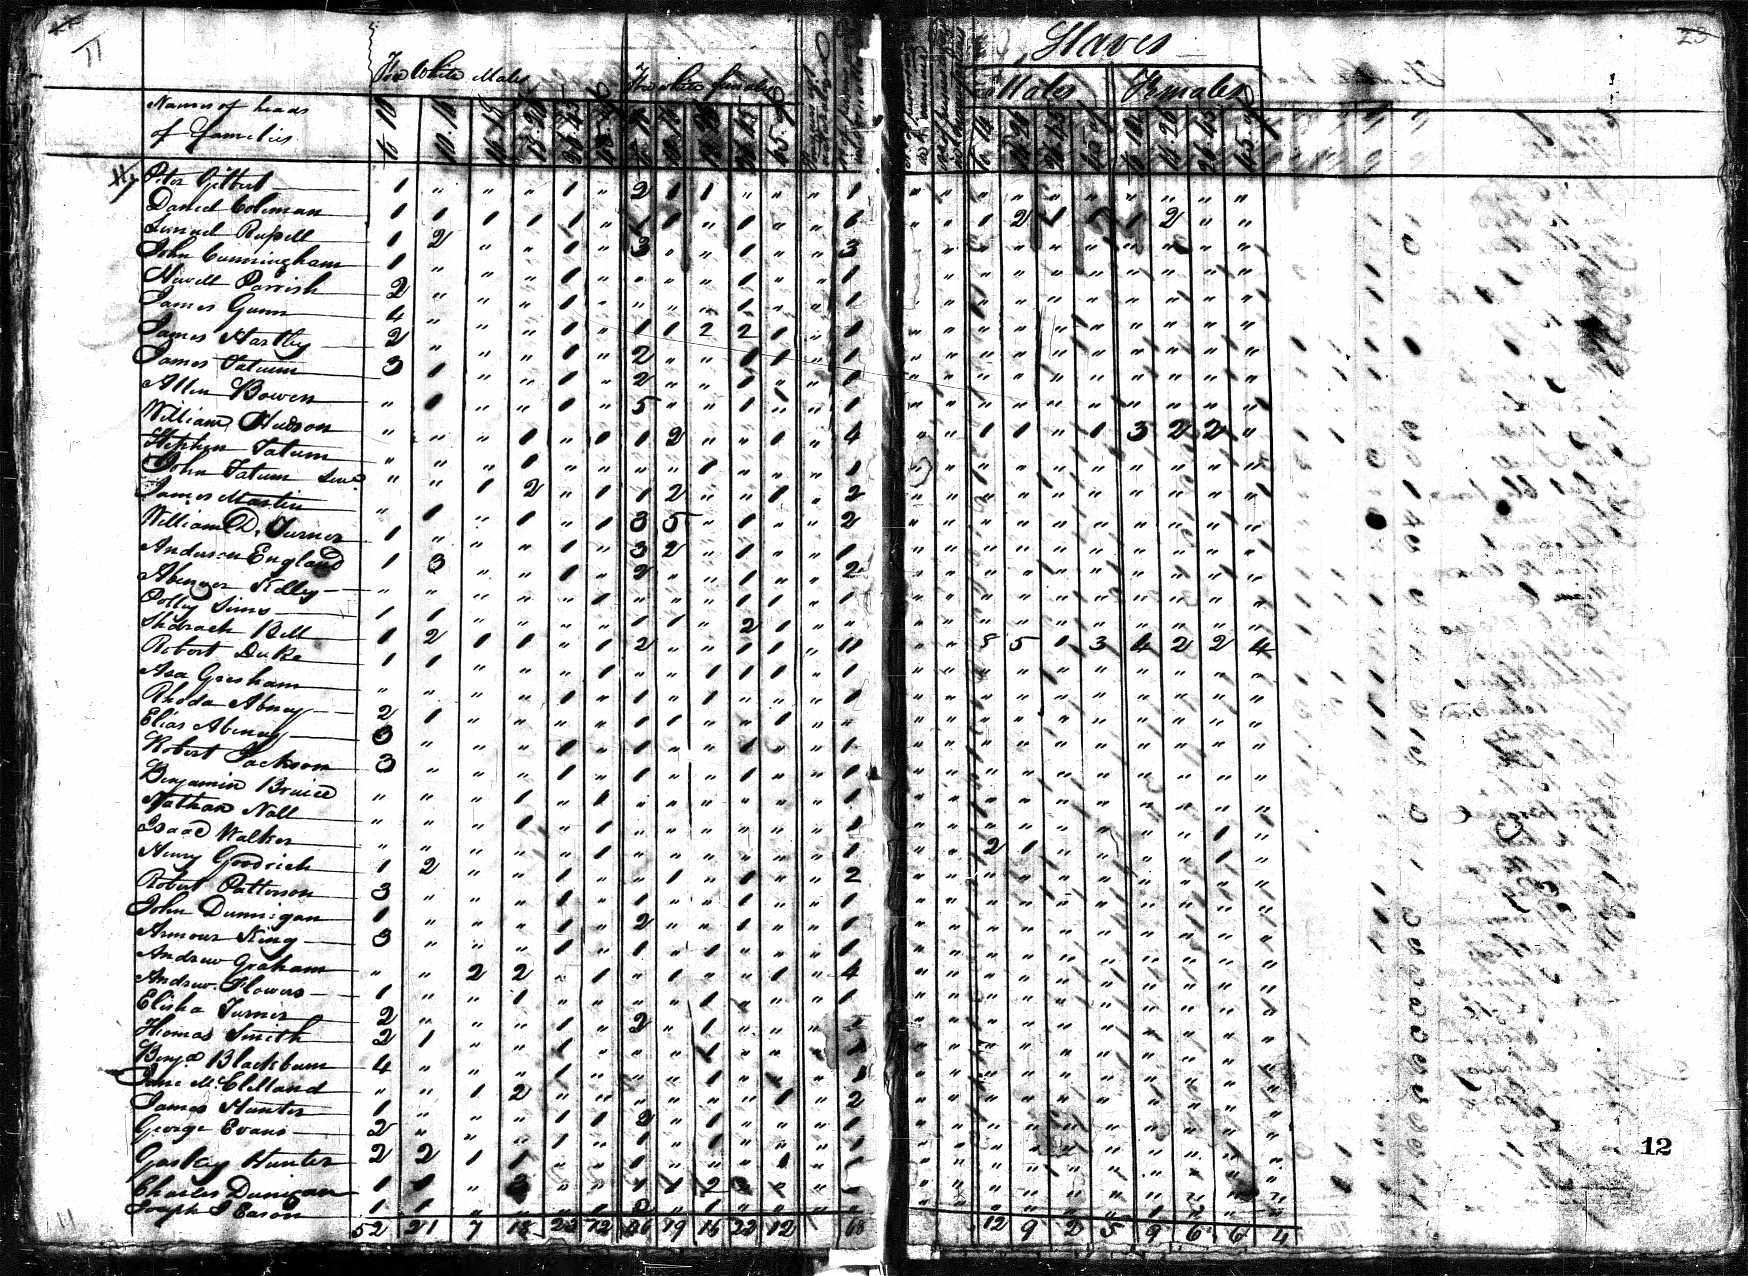 James Hartley and wife Elizabeth Walker, 1820 Dickson County, Tennessee, census